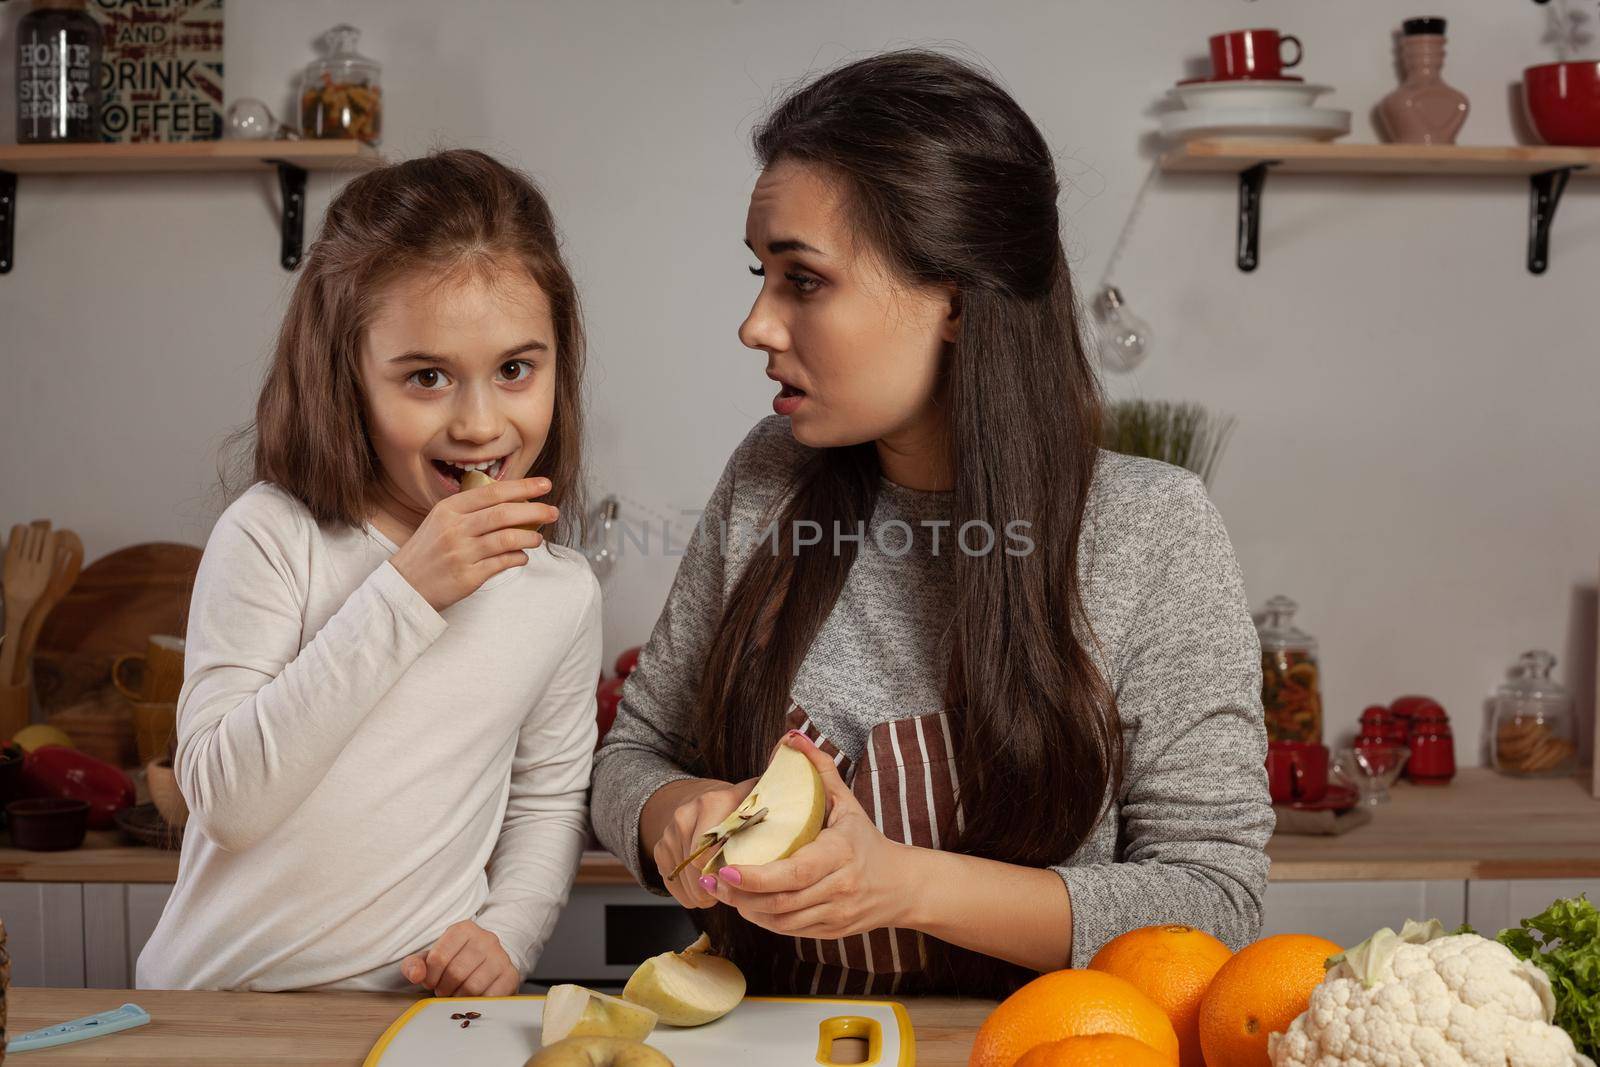 Happy loving family are cooking together. Gorgeous mom and her kid are doing a fruit cutting and tasting an apple at the kitchen, against a white wall with shelves and bulbs on it. Homemade food and little helper.